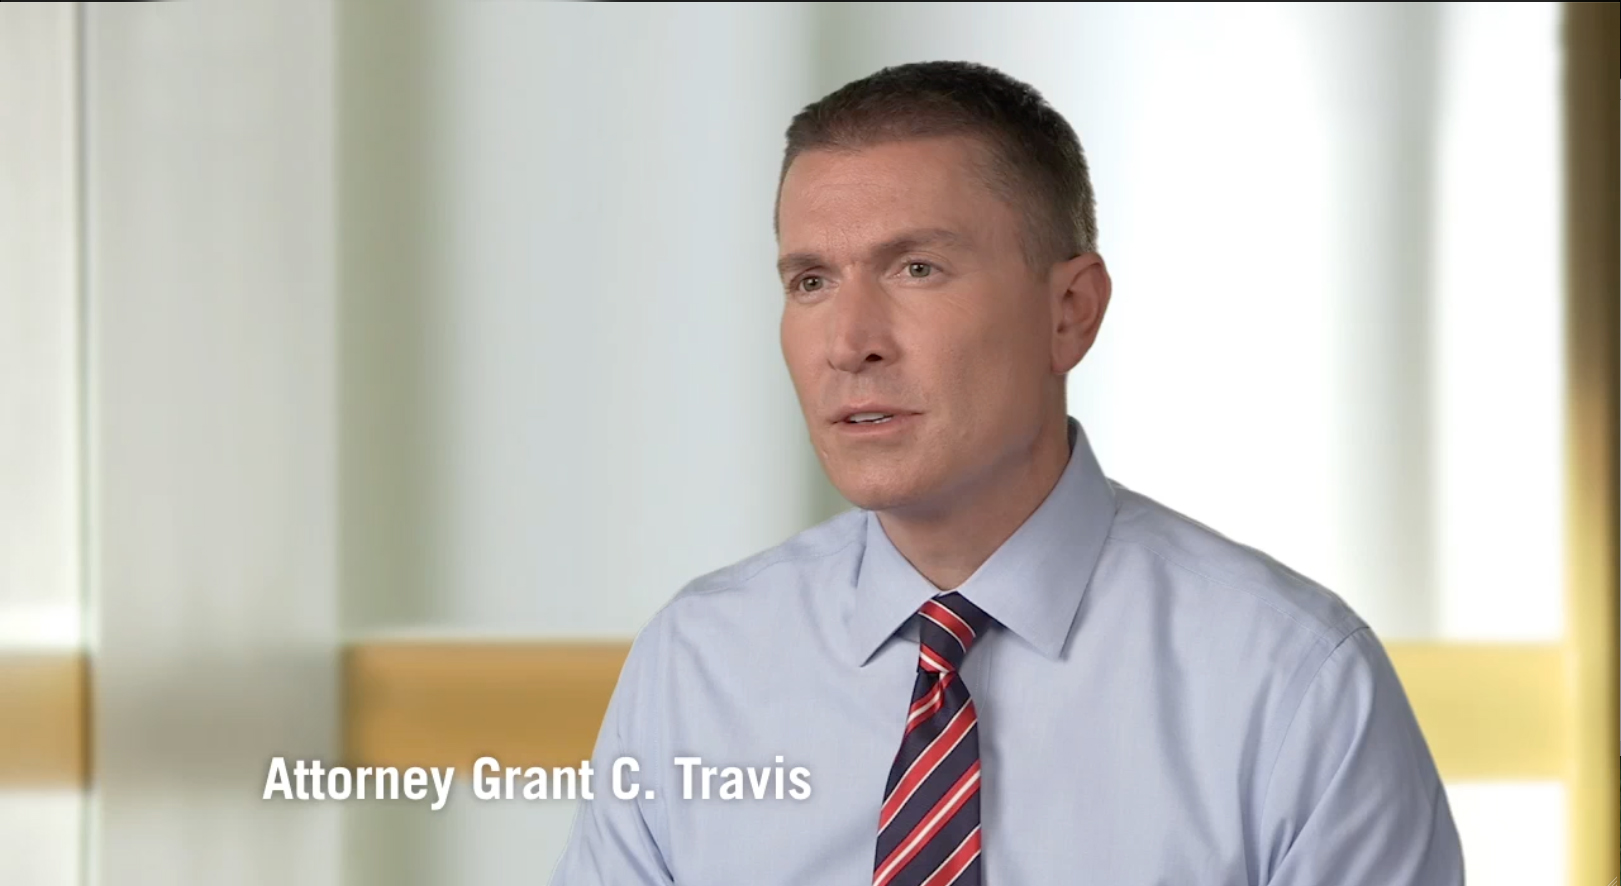 Attorney Grant Travis | Travis Law Firm | Personal Injury Attorney, DUI Defense Attorney, Criminal Defense Attorney | Serving Erie, Crawford, Warren & all of Northwestern PA | Call the Travis Law Firm at 814-277-2222 today!